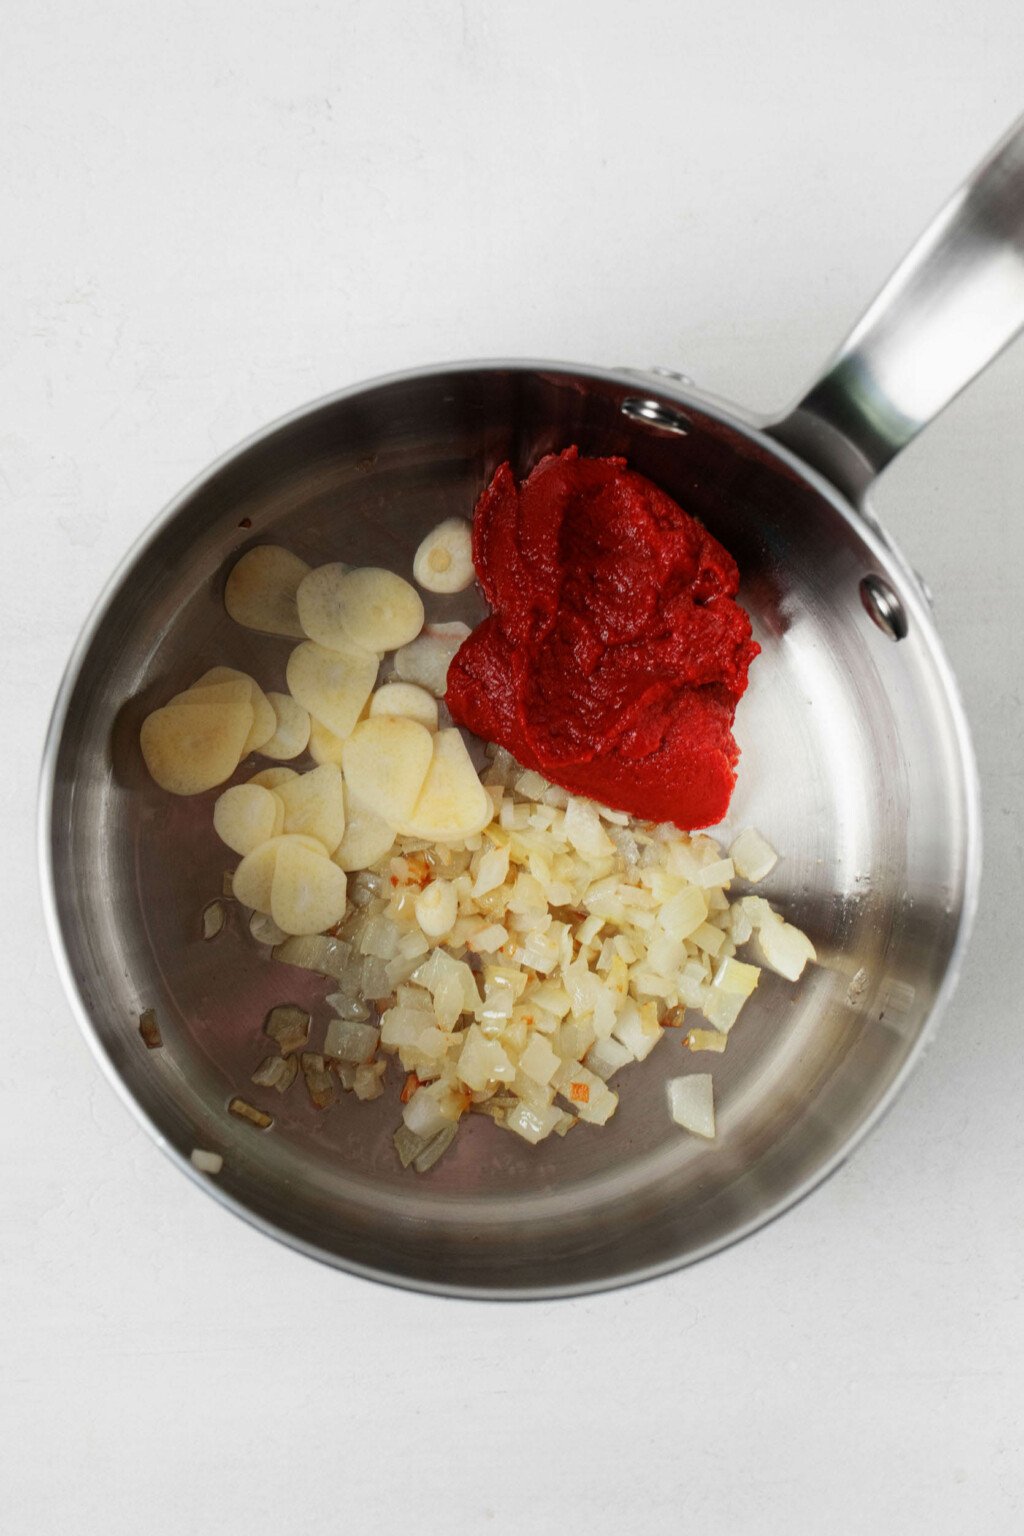 Garlic, onions, and tomato paste are being simmered in a silver, stainless steel sauce pot.